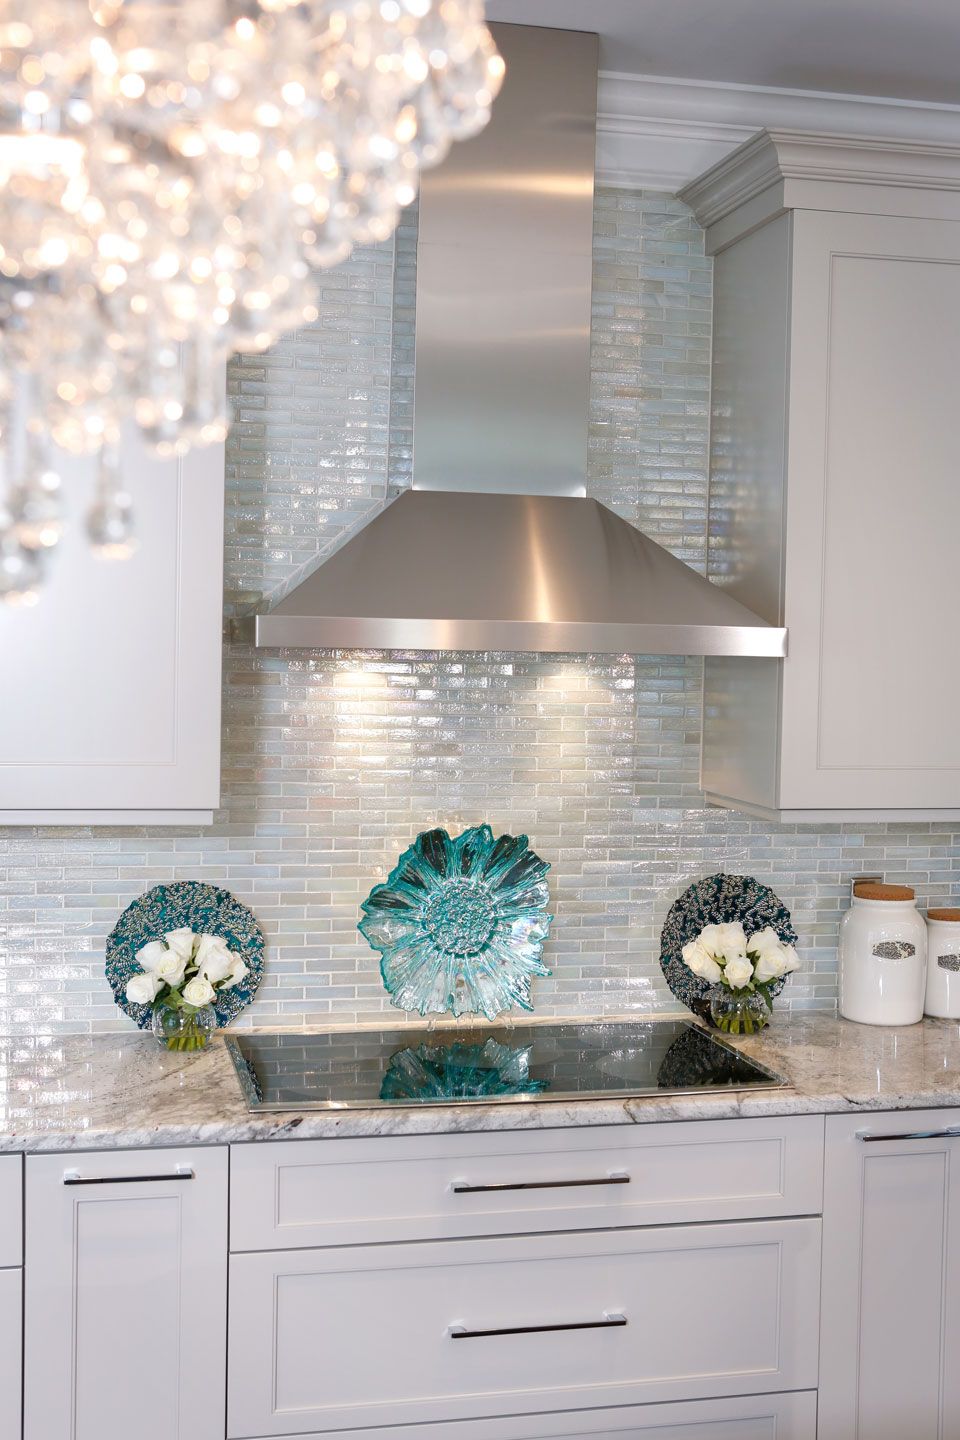 Luminous kitchen back wall made of glass tiles